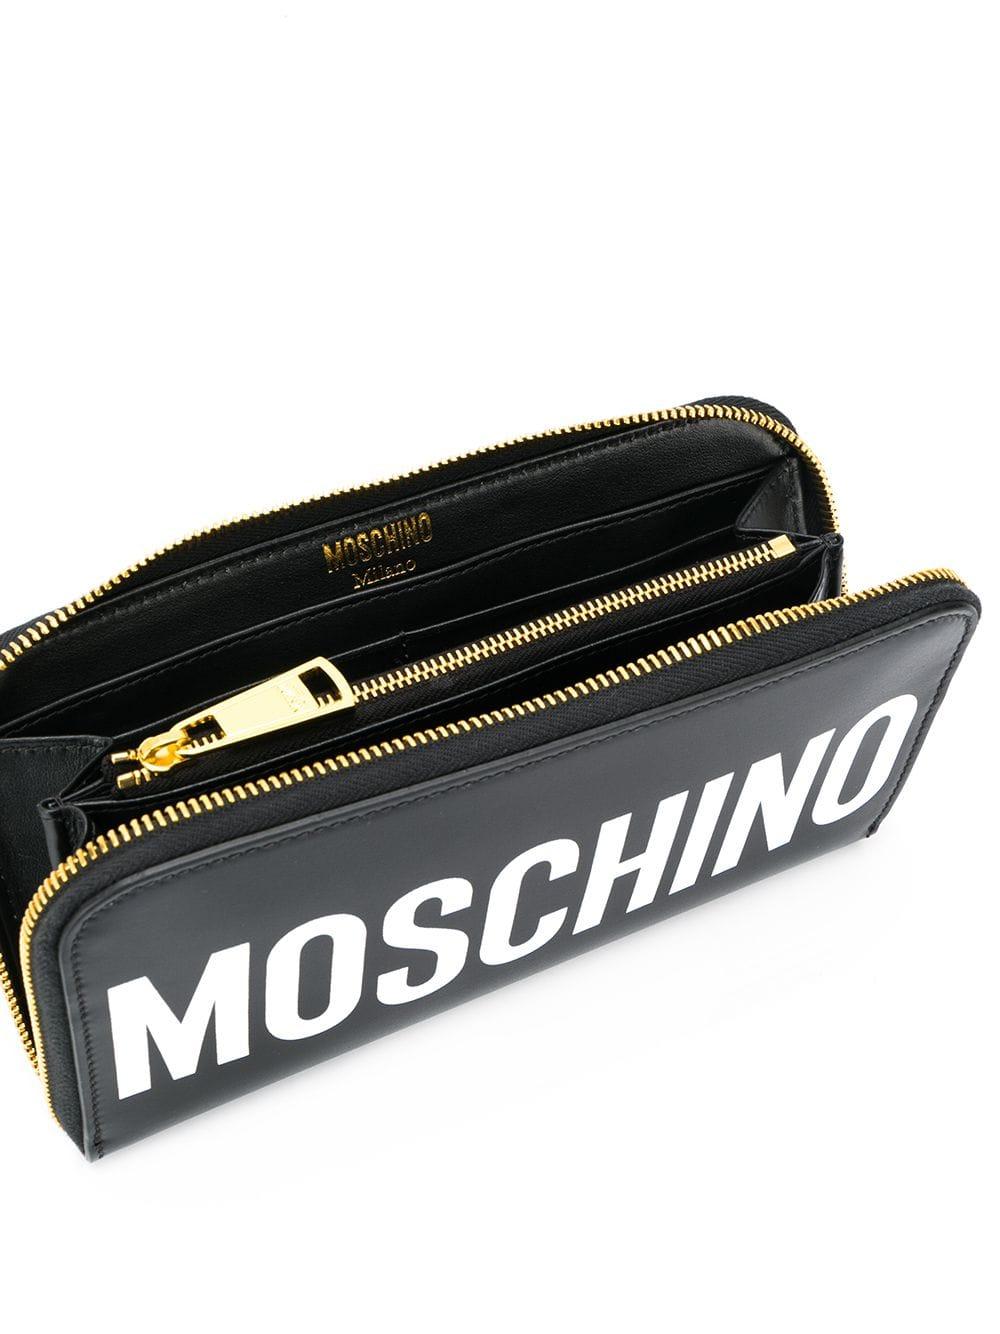 Moschino Leather Logo Print Zipped Wallet in Black - Lyst